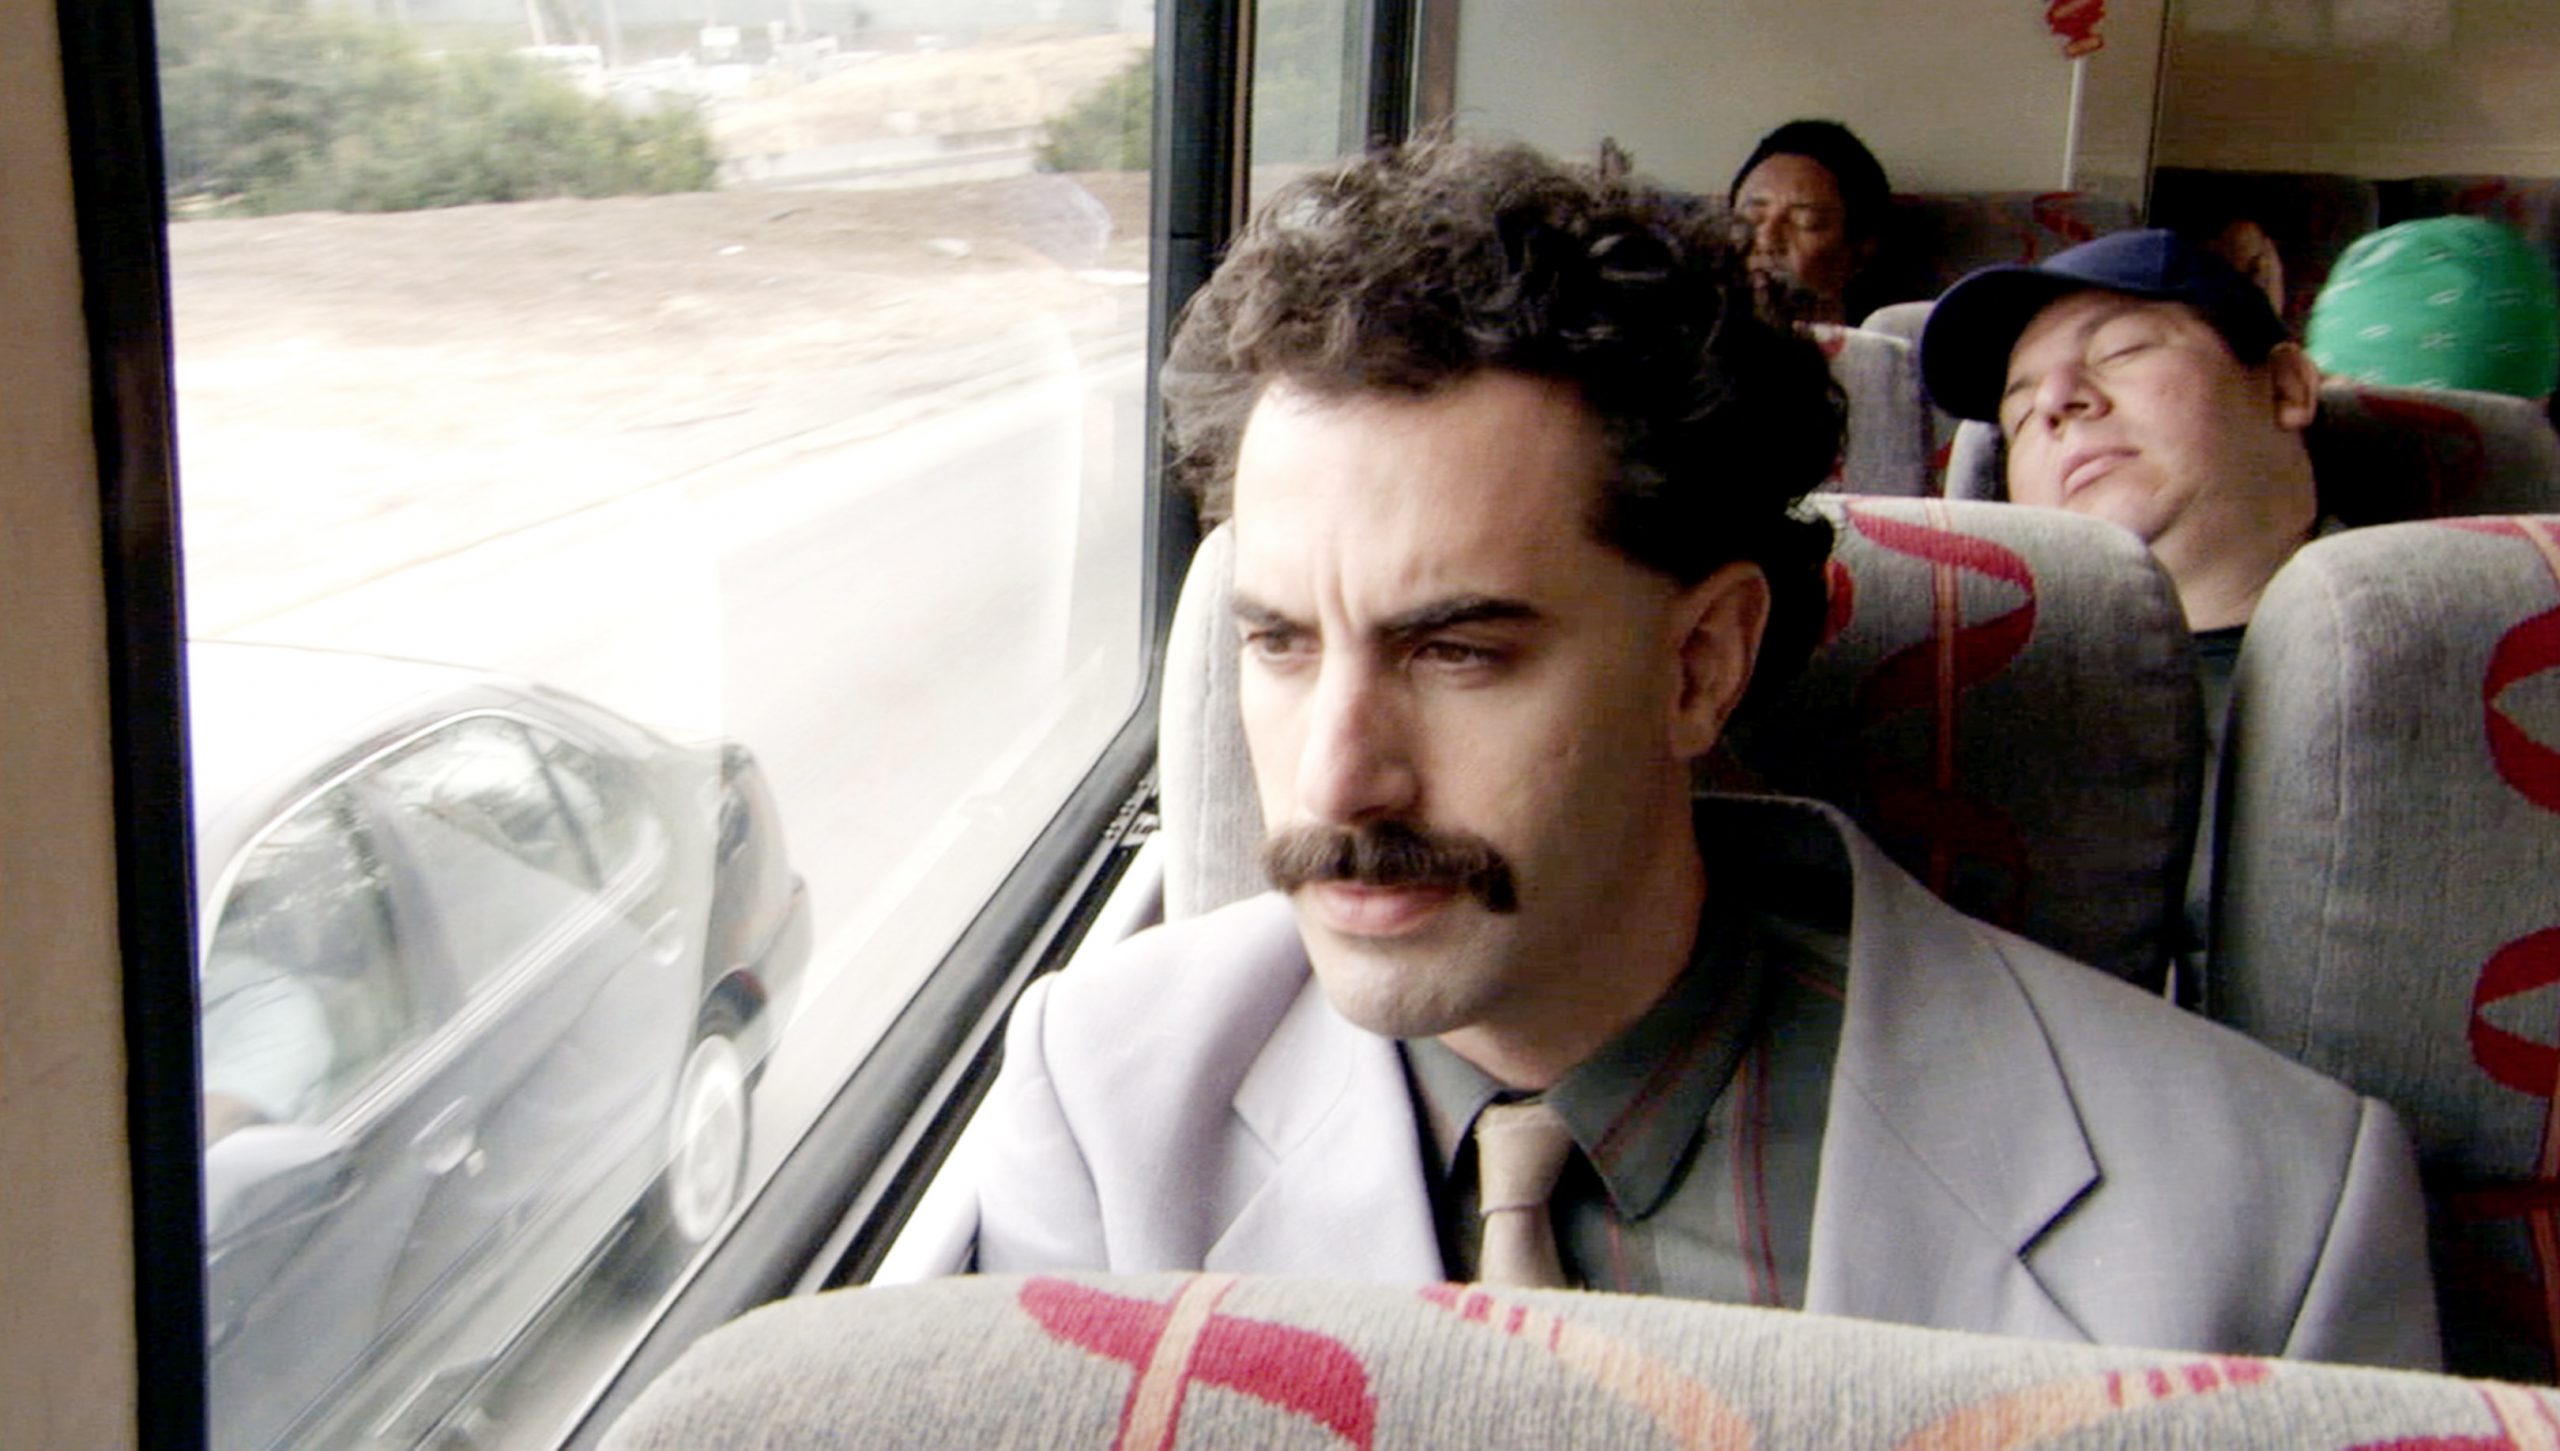 BORAT: CULTURAL LEARNINGS OF AMERICA FOR MAKE BENEFIT GLORIOUS NATION OF KAZAKHSTAN, Sacha Baron Cohen, 2006. TM & ©20th Century Fox. All rights reserved./courtesy Everett Collection